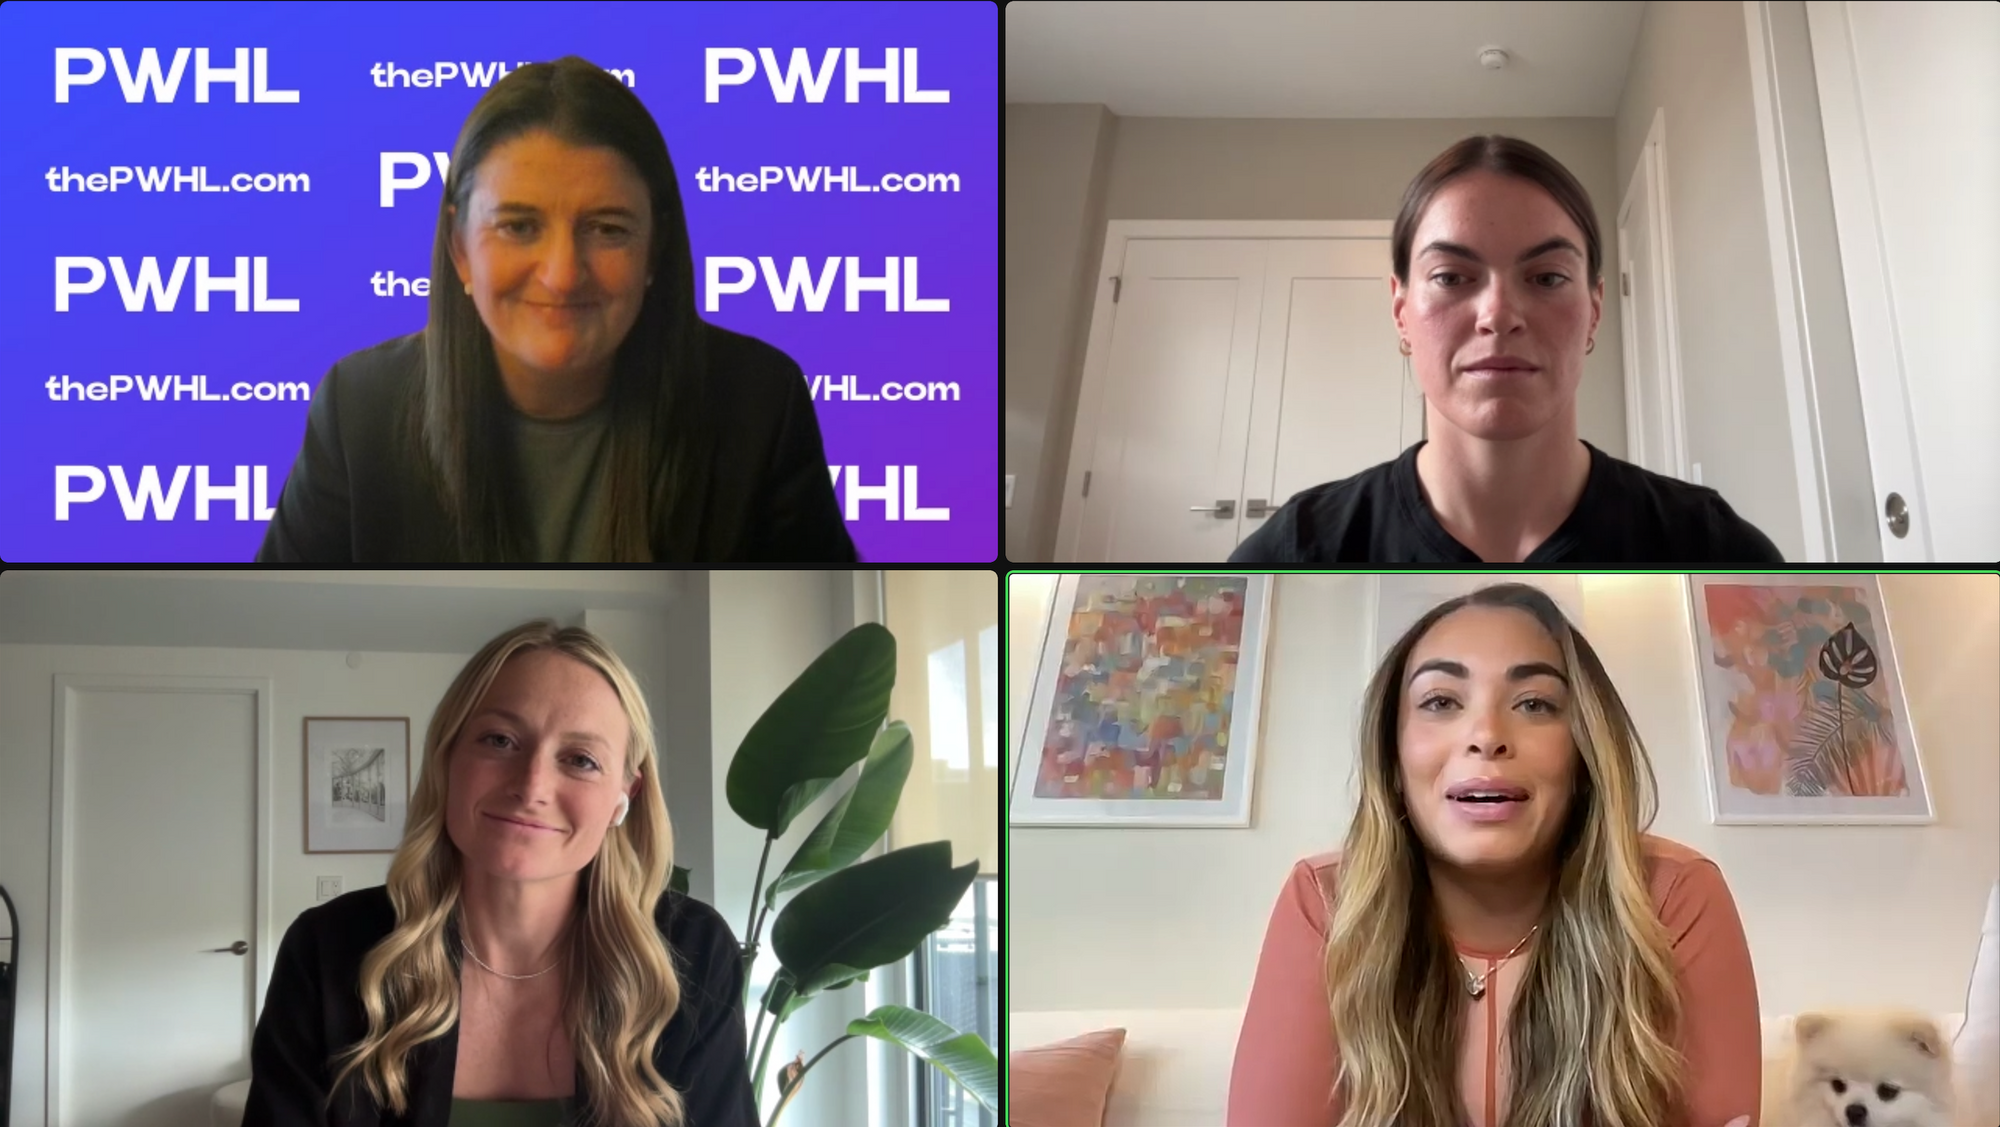 PWHL Toronto Signs Fast, Nurse, and Turnbull to Three-Year Deals